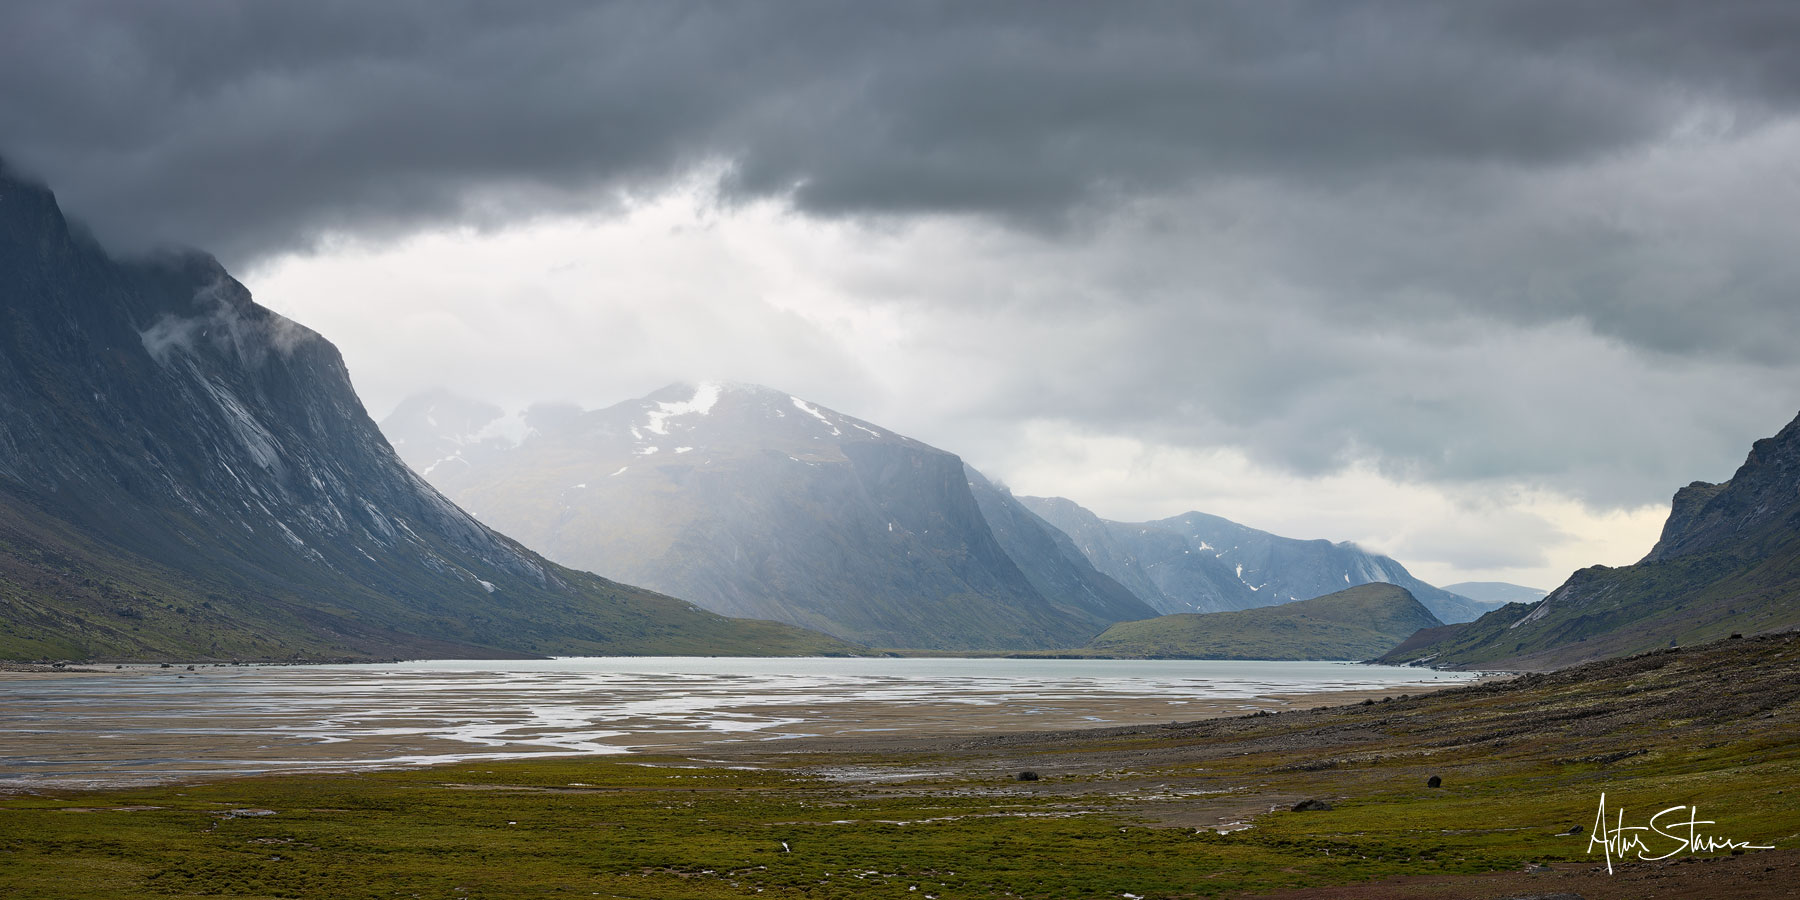 End of the storm during Baffin Island adventure.